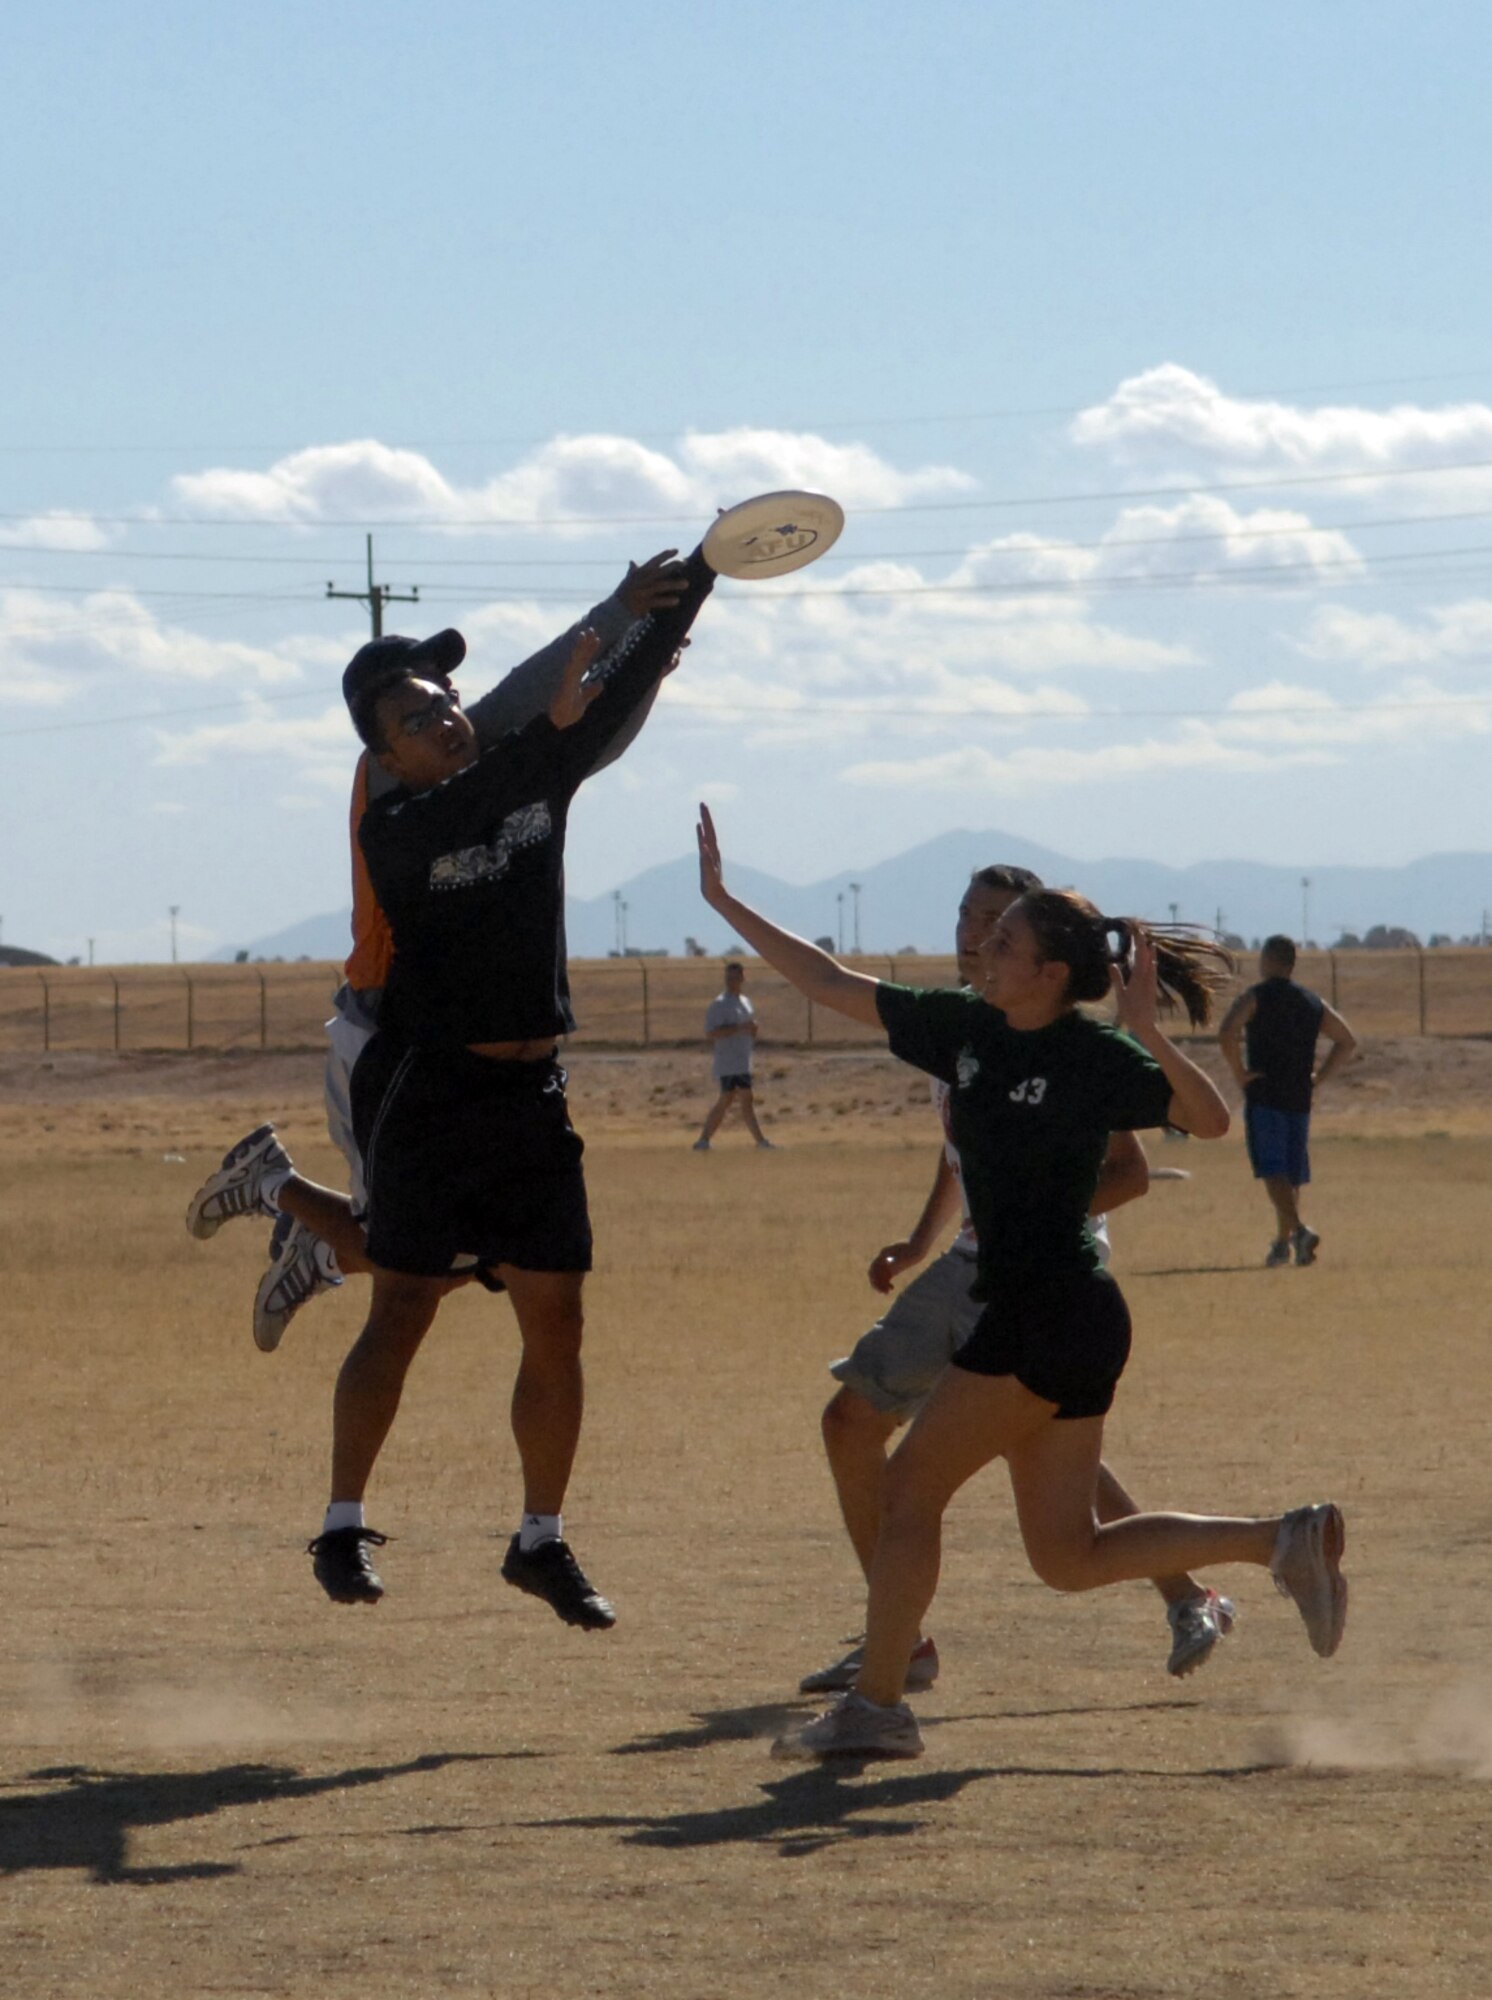 Airmen from Twelfth Air Force and Air Forces Southern compete in an ultimate frisbee competition during their third bi-annual sports day here Nov. 3. (U.S. Air Force photo/Airman 1st Class Jamie L. Coggan)